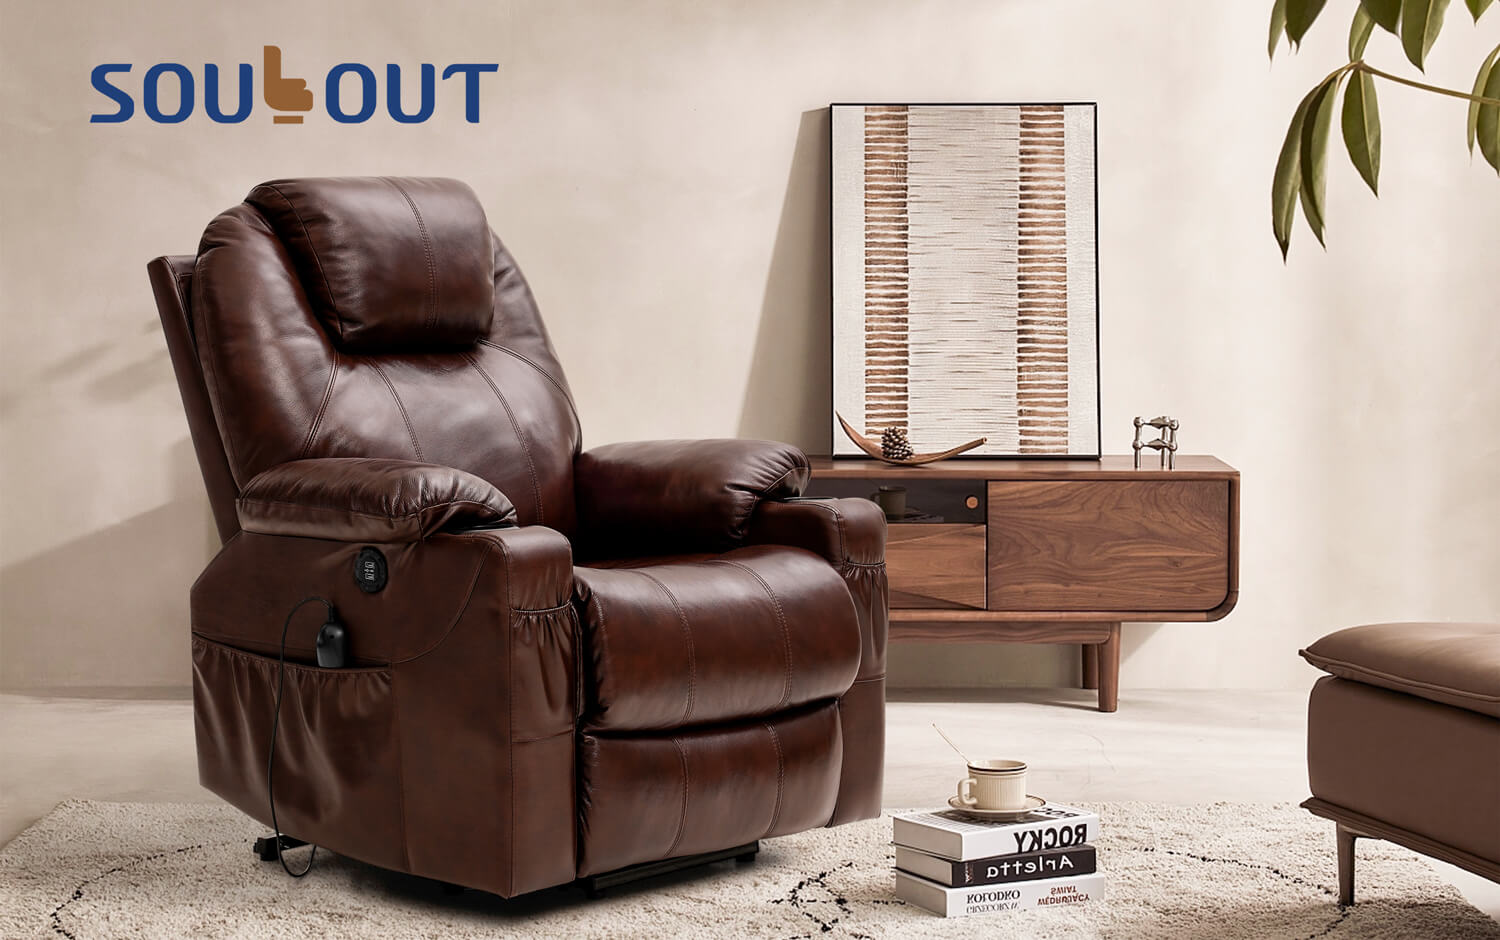 Soulout lift chair for elderly